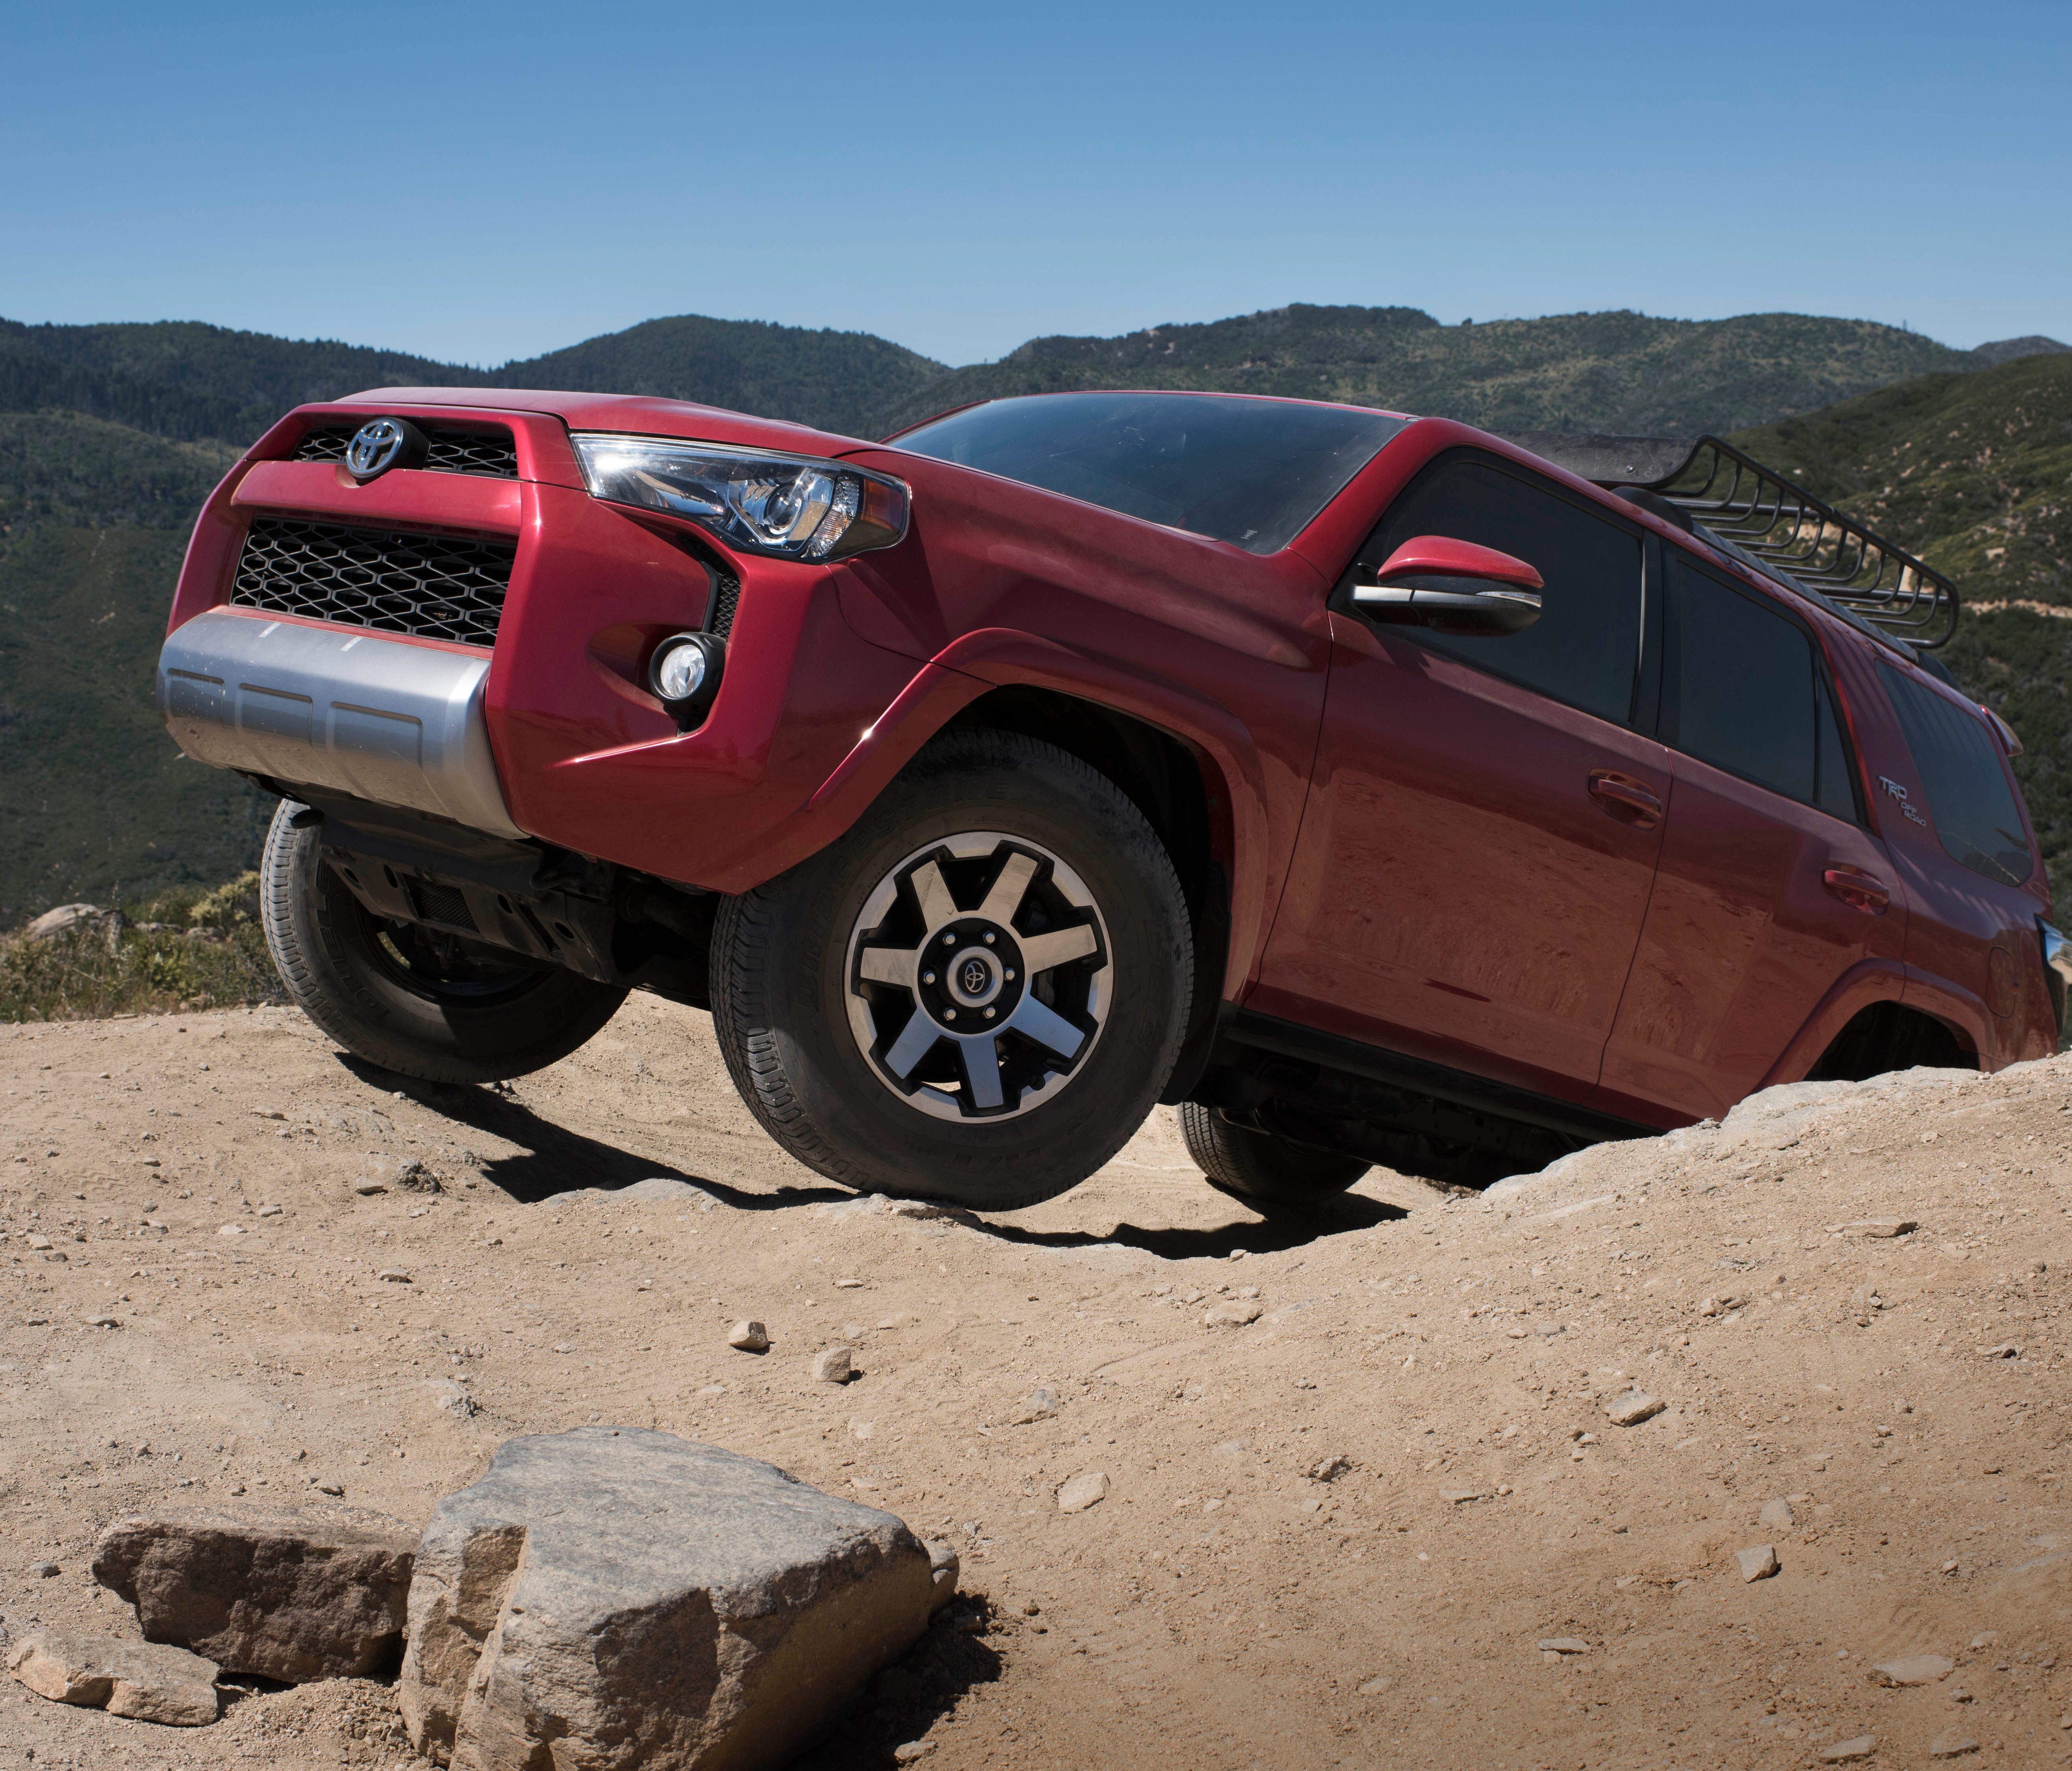 Toyota's 4Runner TRD can take the toughest trails